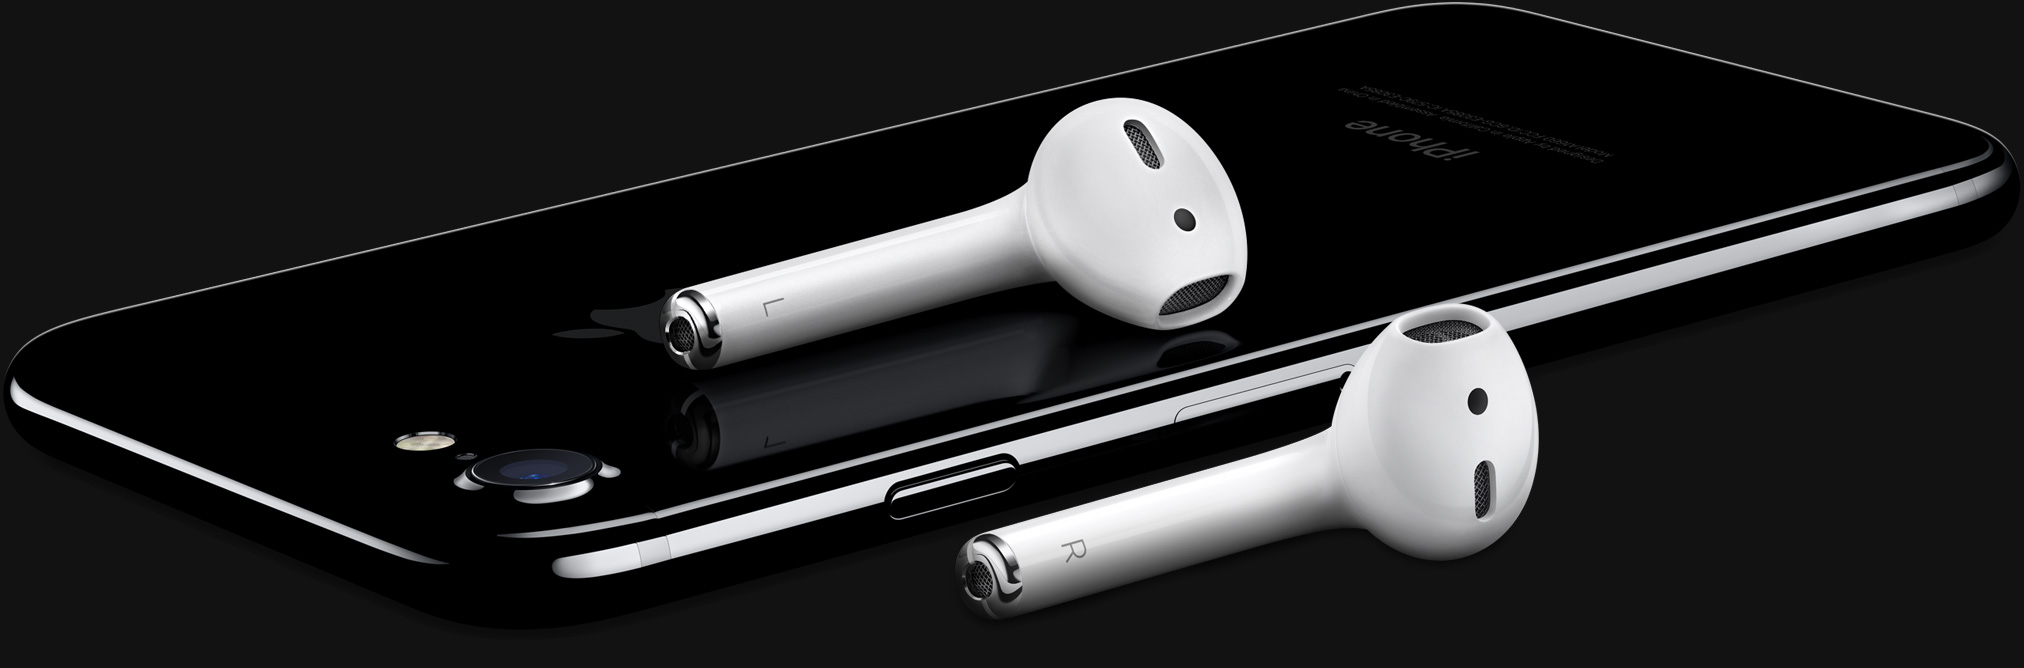 iPhone-7-and-airpods